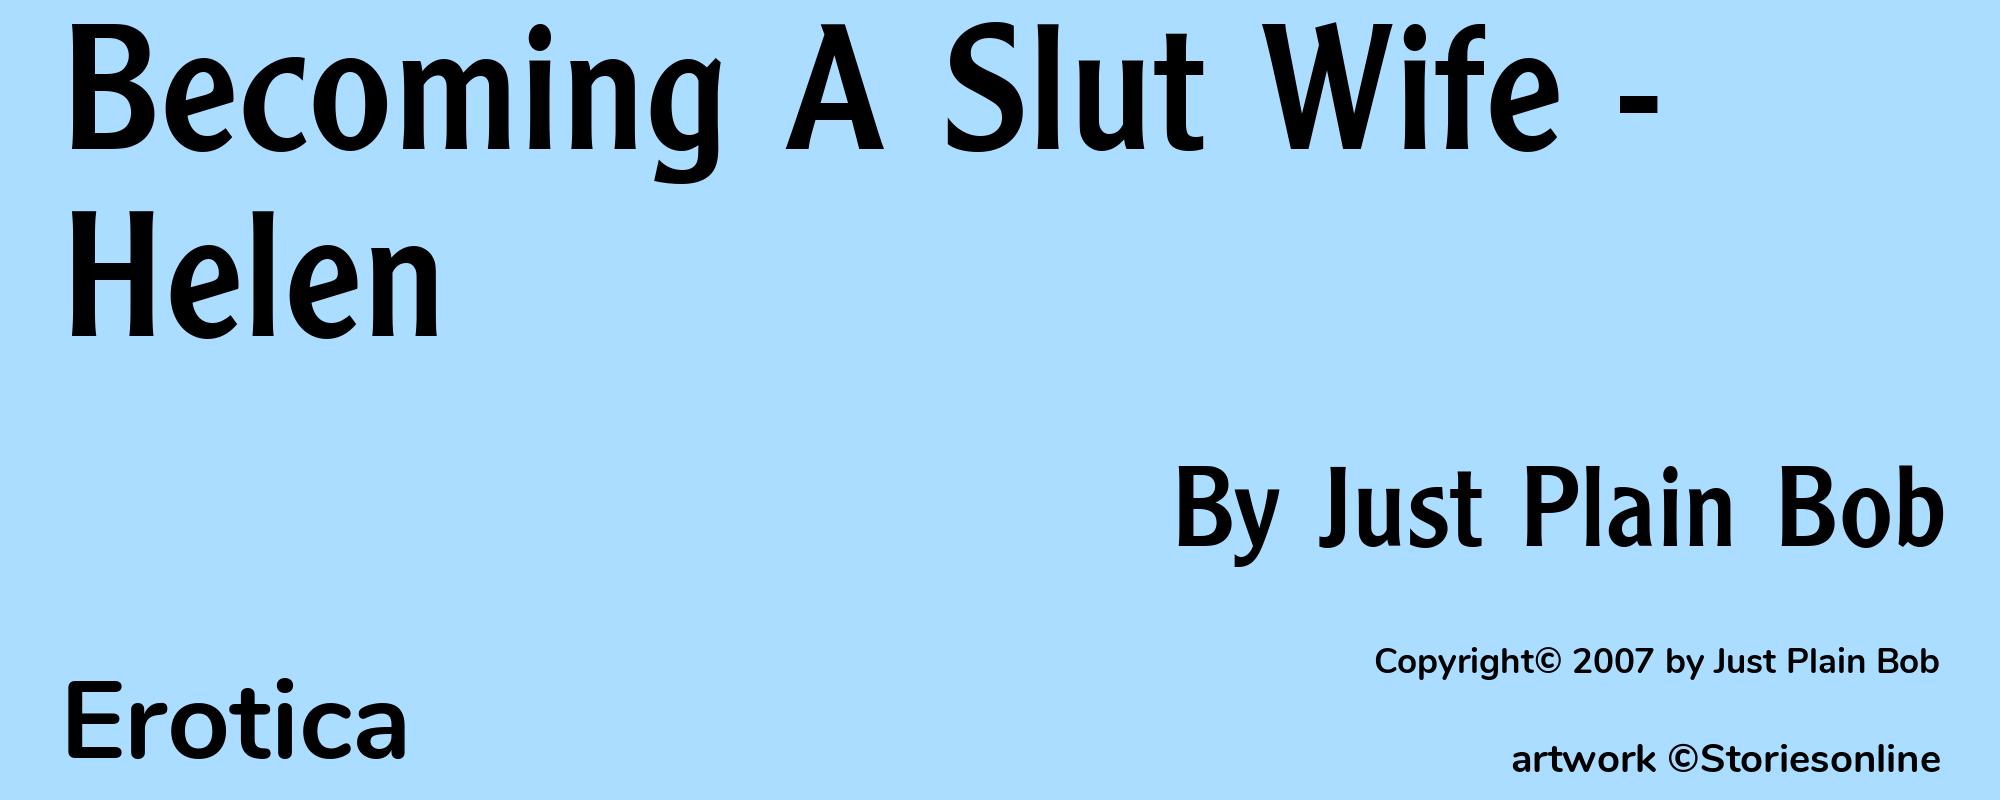 Becoming A Slut Wife - Helen - Cover